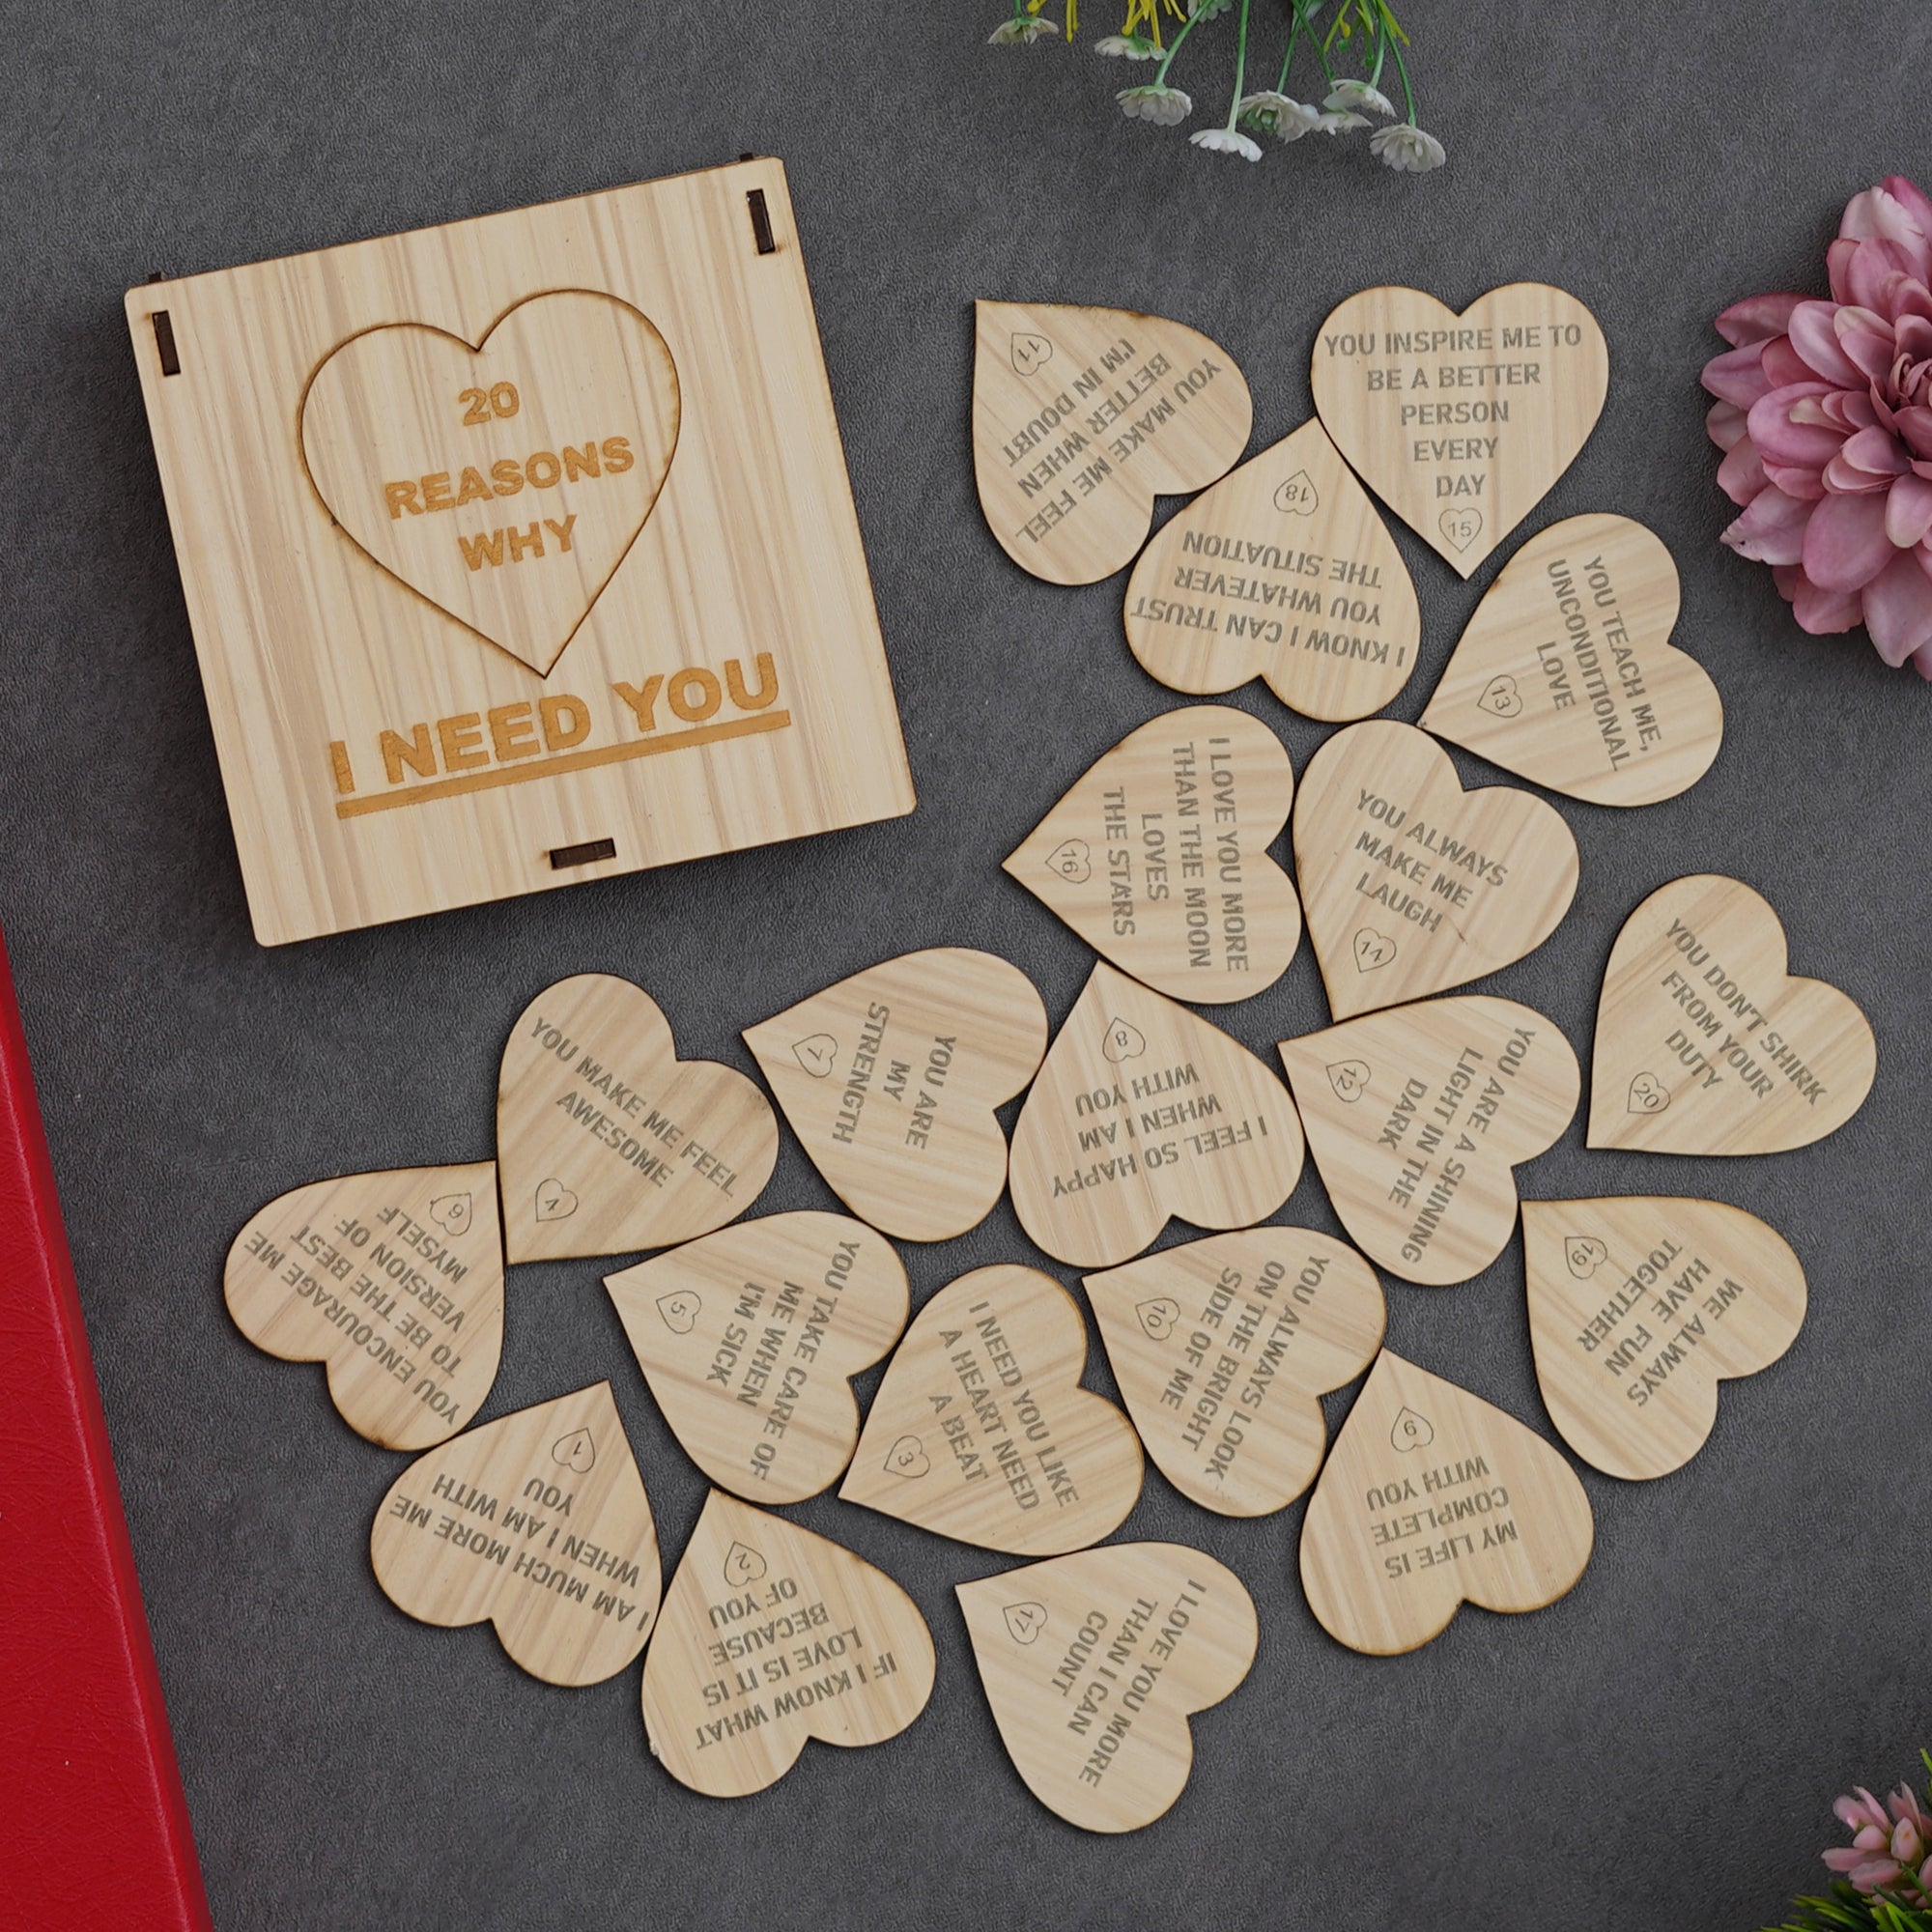 Valentine Combo of Card, Heart Shaped Gift Box Set with White Teddy and Red Roses, "20 Reasons Why I Need You" Printed on Little Hearts Wooden Gift Set 5